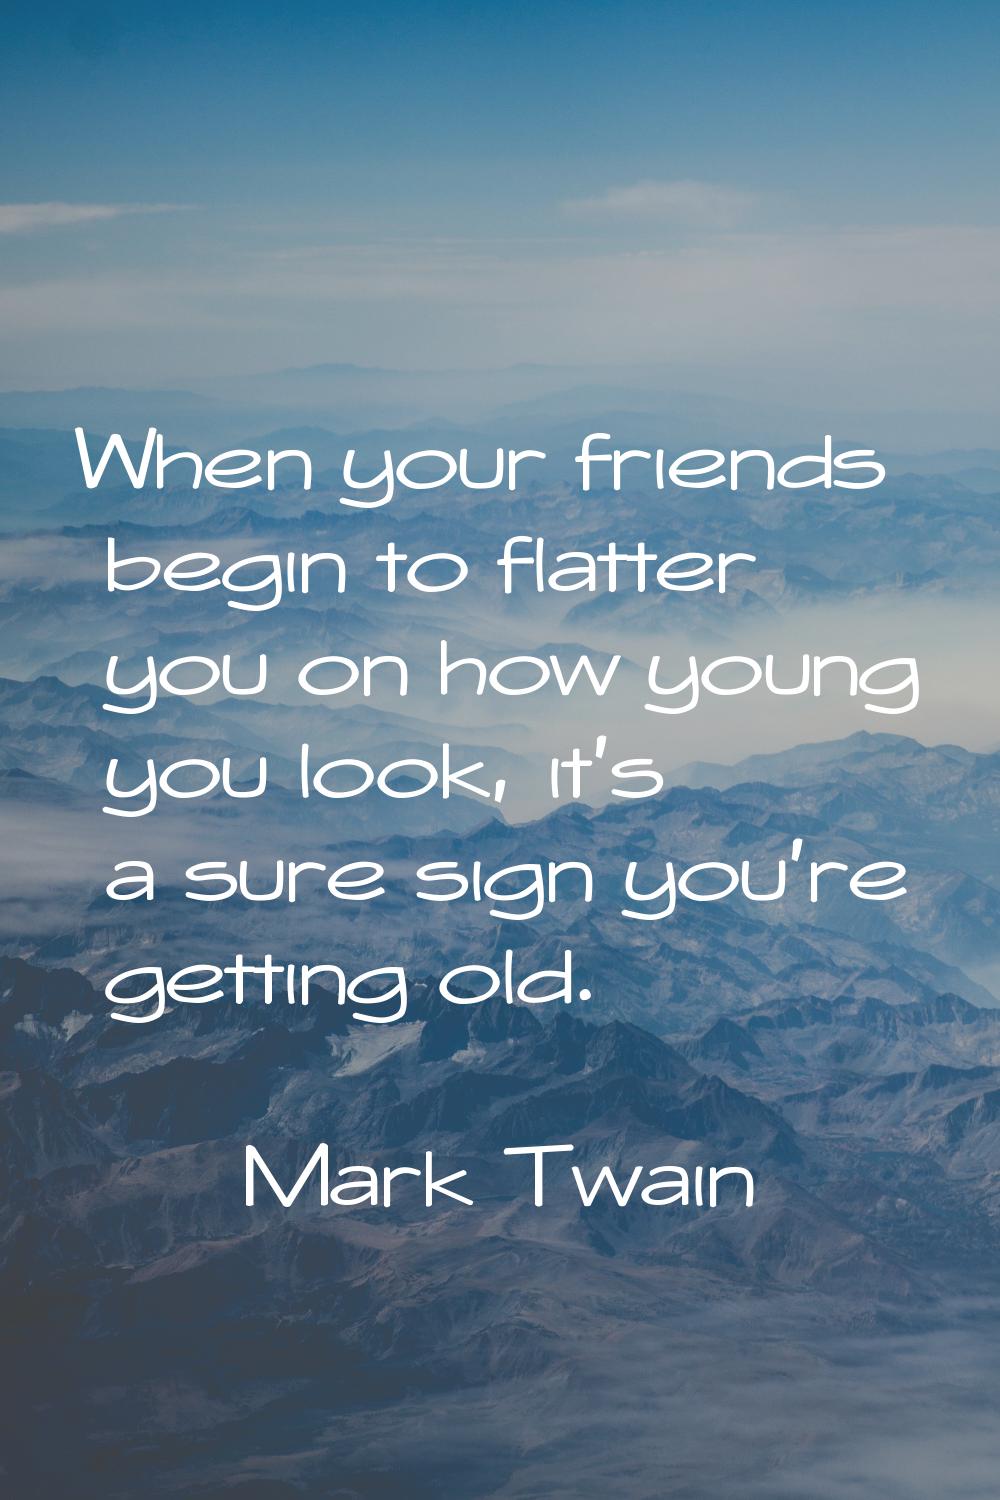 When your friends begin to flatter you on how young you look, it's a sure sign you're getting old.